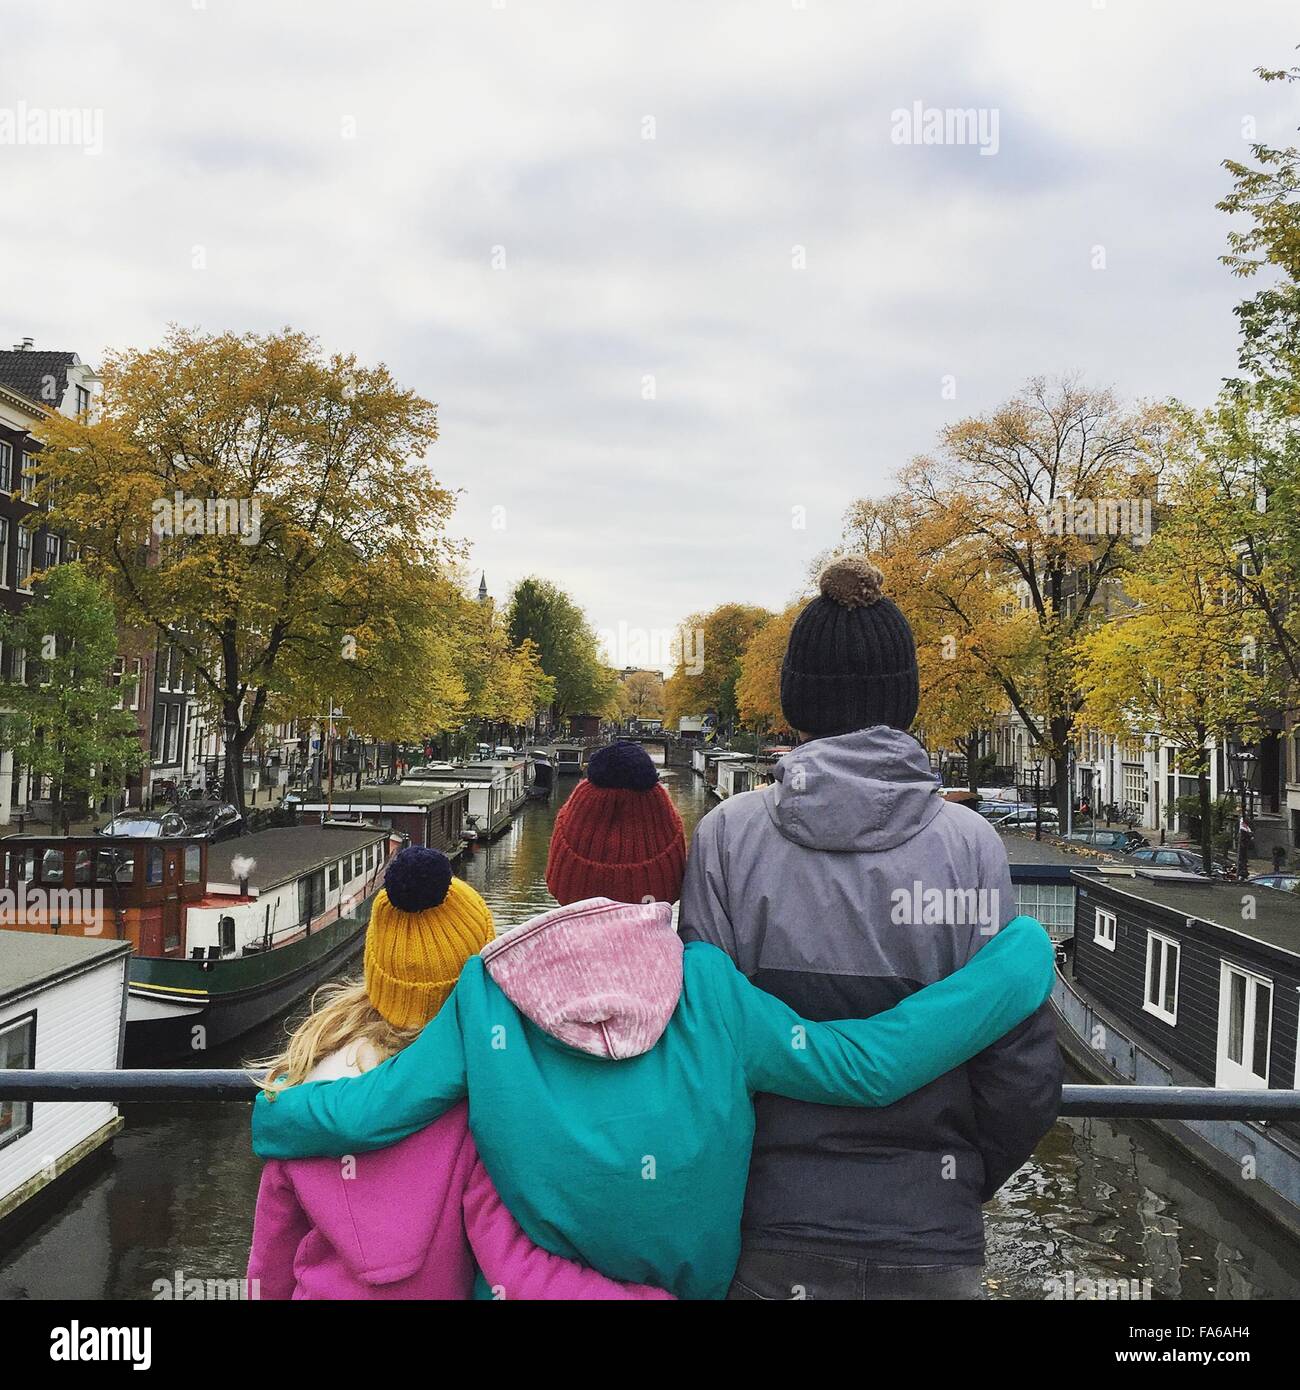 Rear view of two boys and a girl sightseeing in Amsterdam, Netherlands Stock Photo